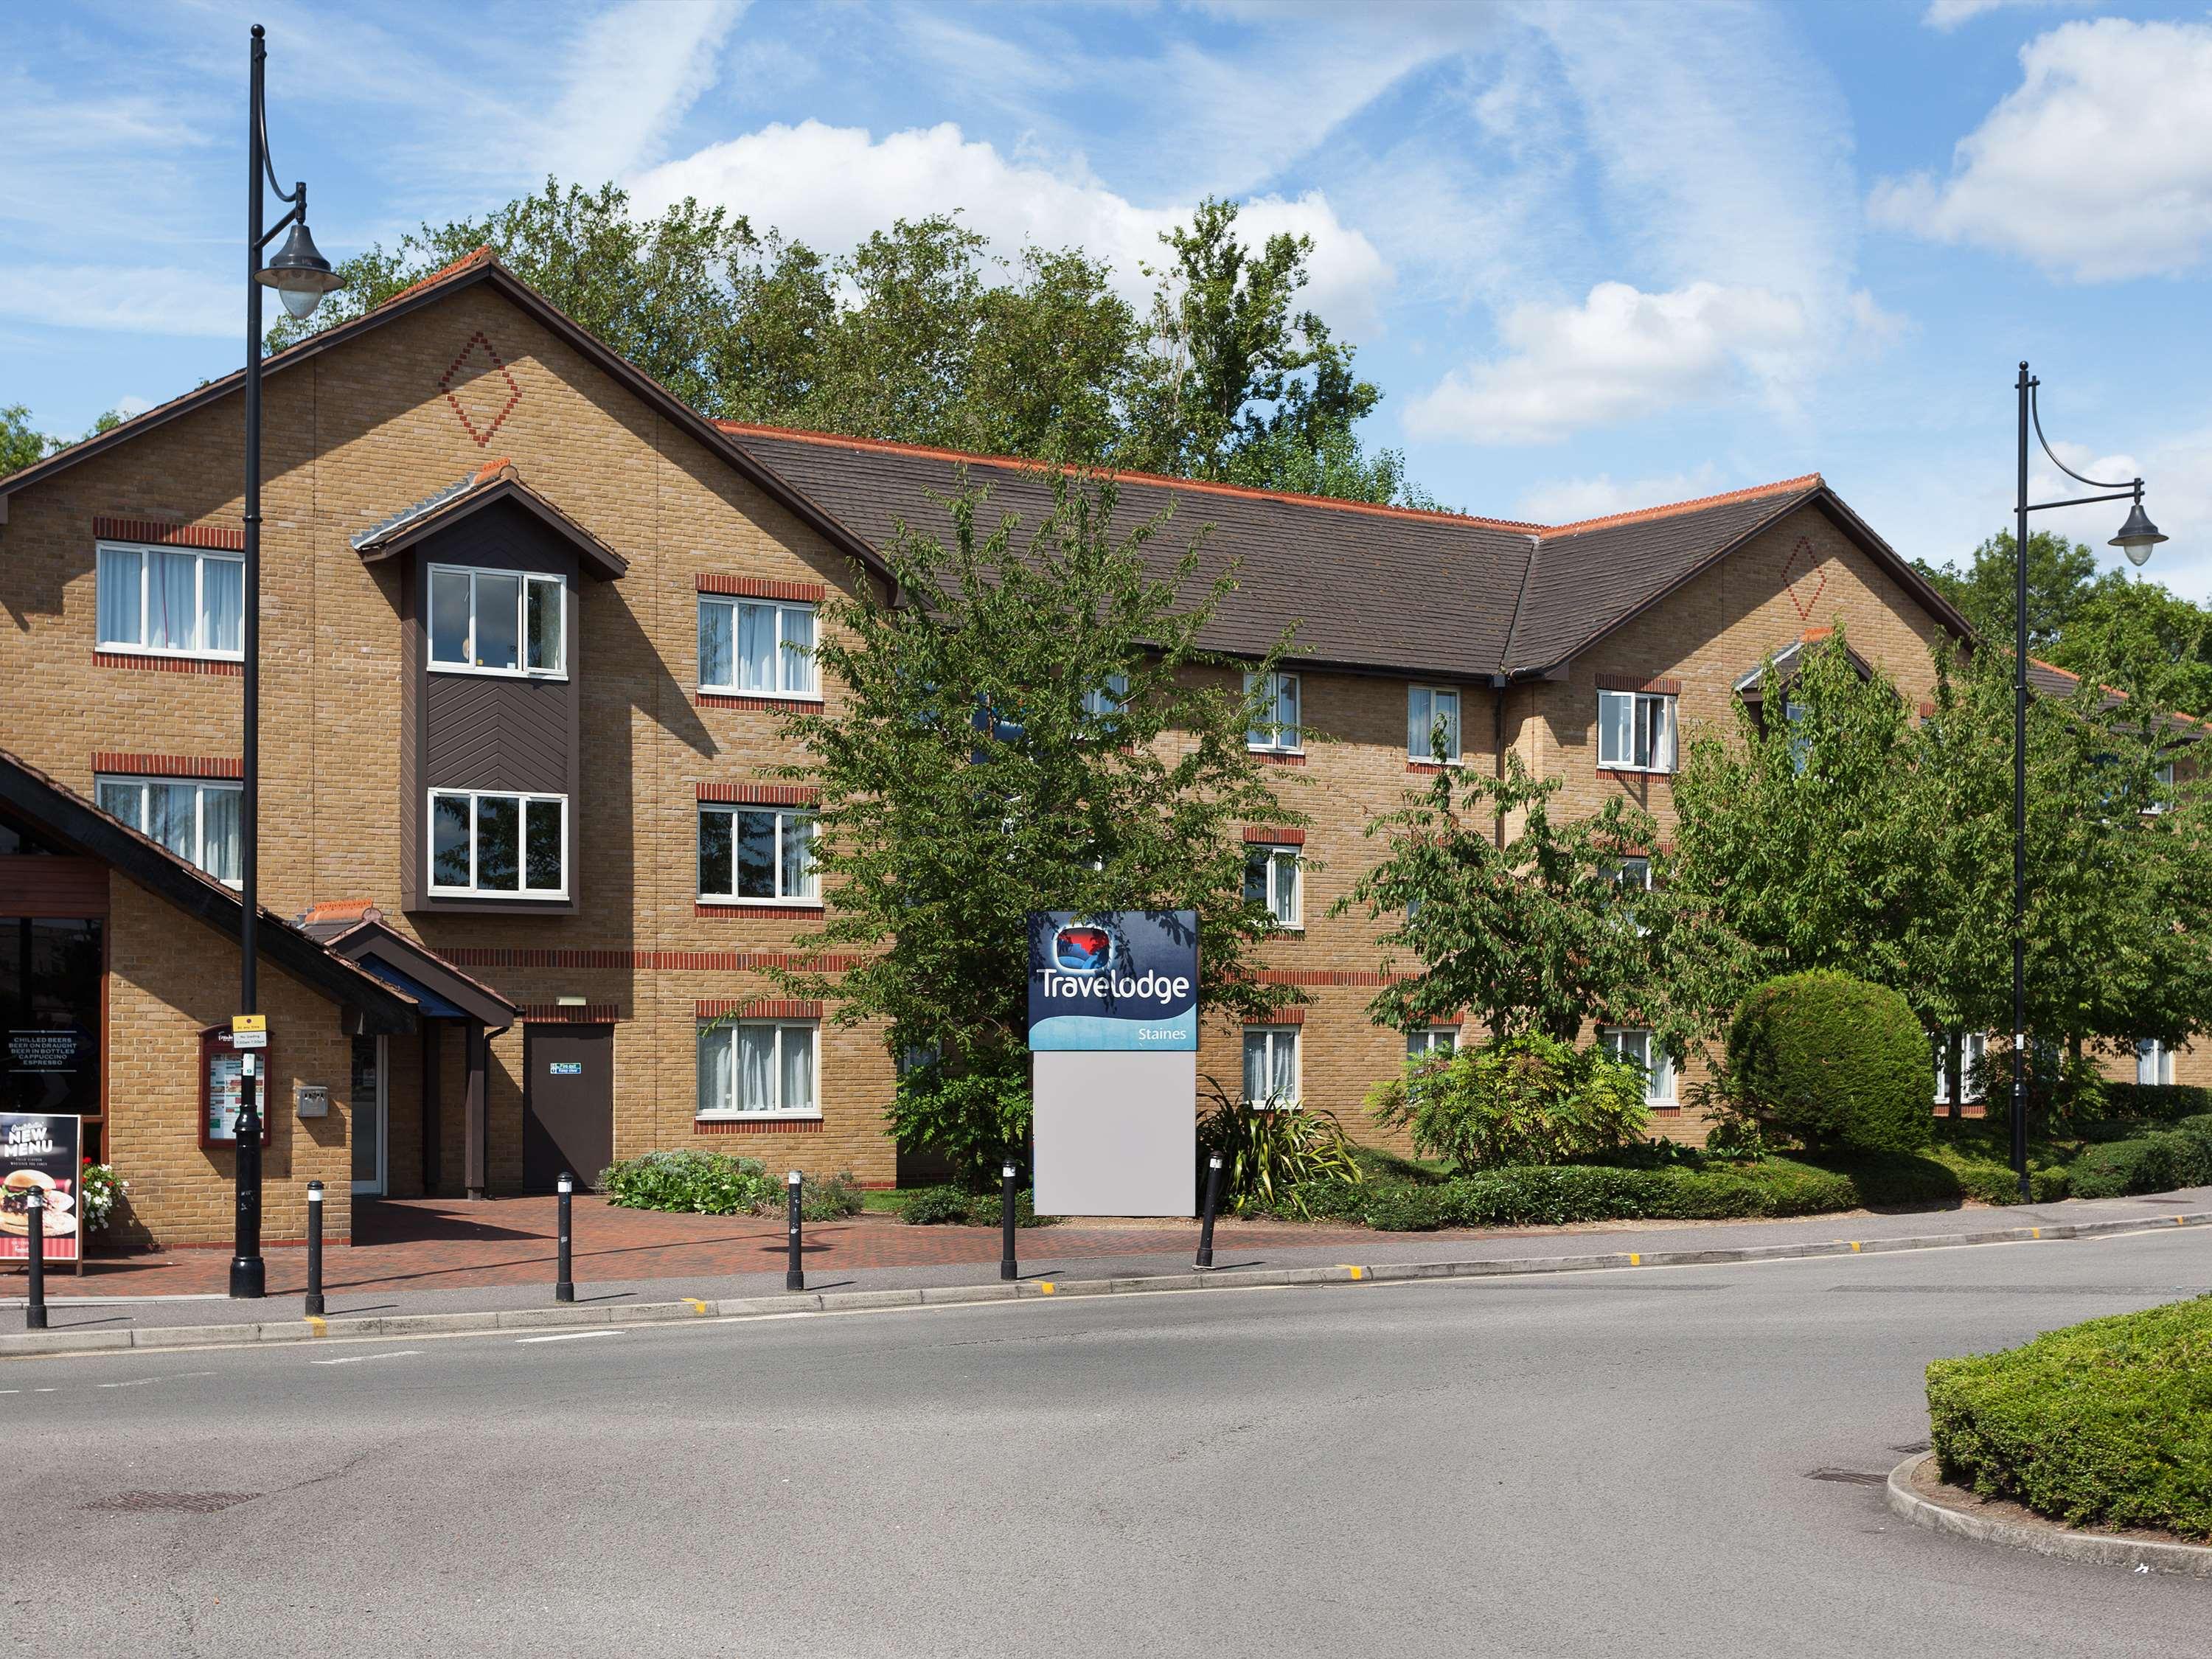 Travelodge Staines image